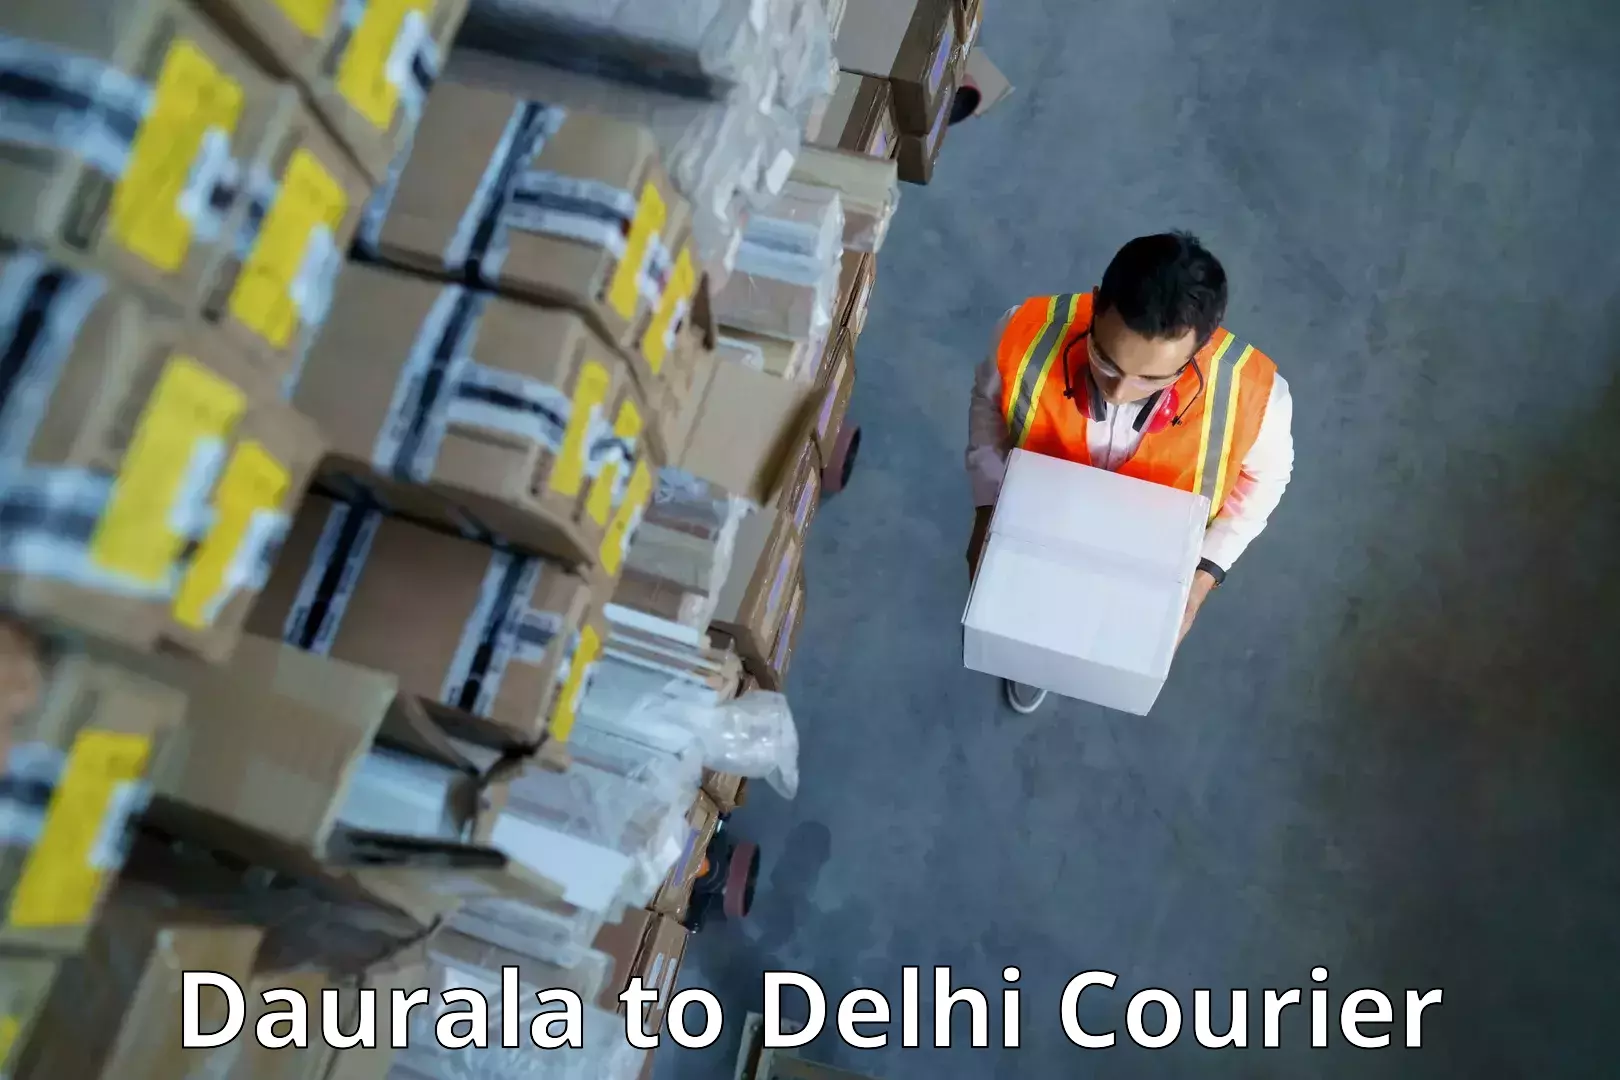 Package delivery network Daurala to NCR